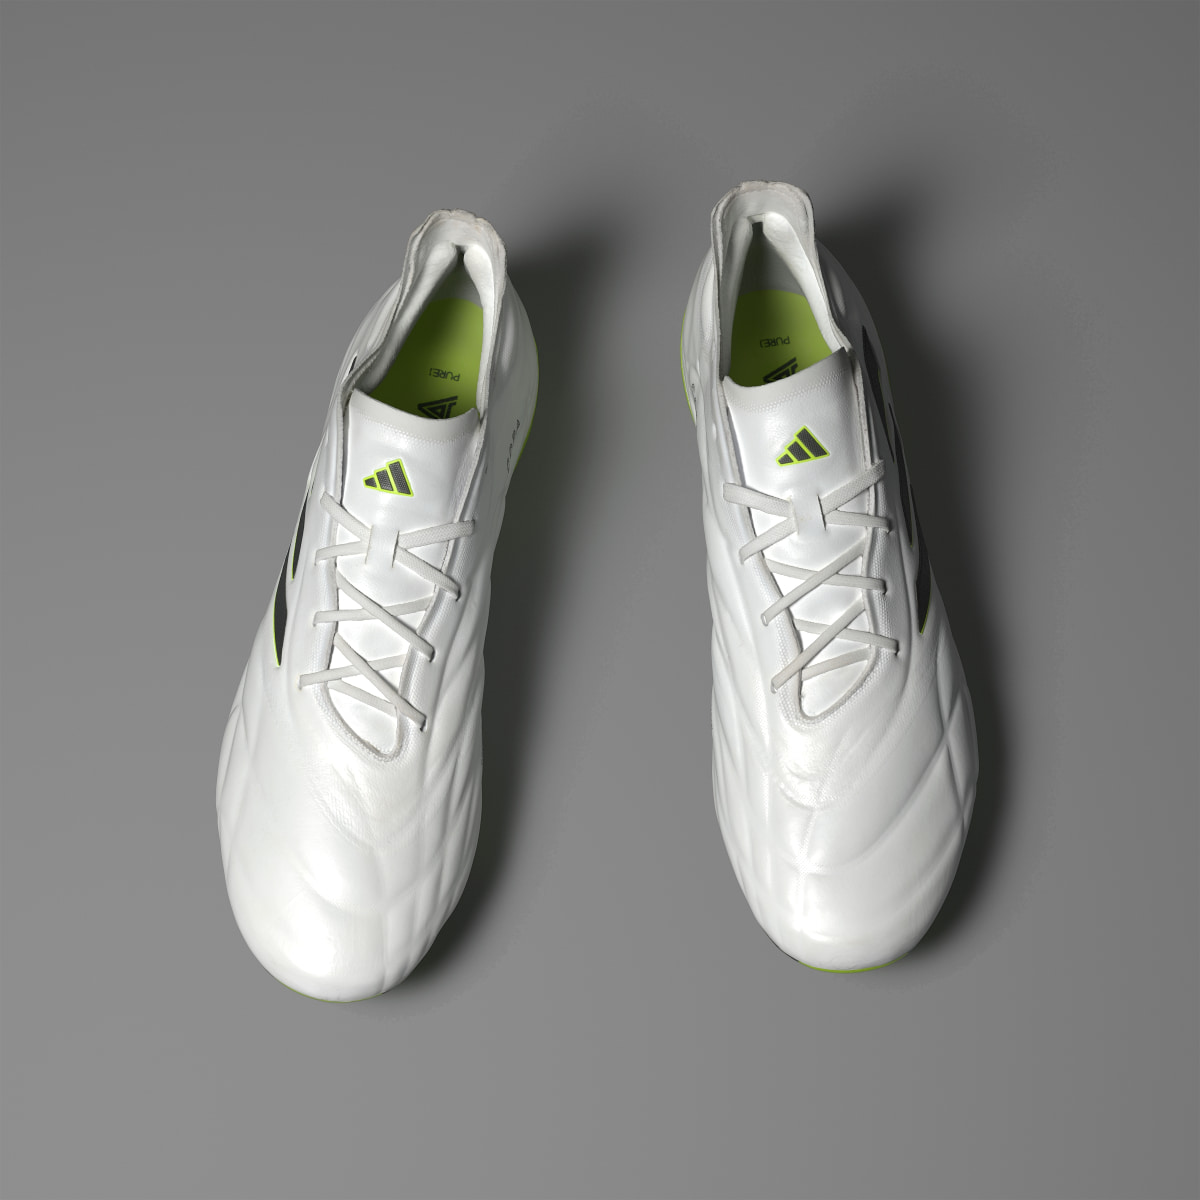 Adidas Copa Pure II.1 Firm Ground Boots. 4